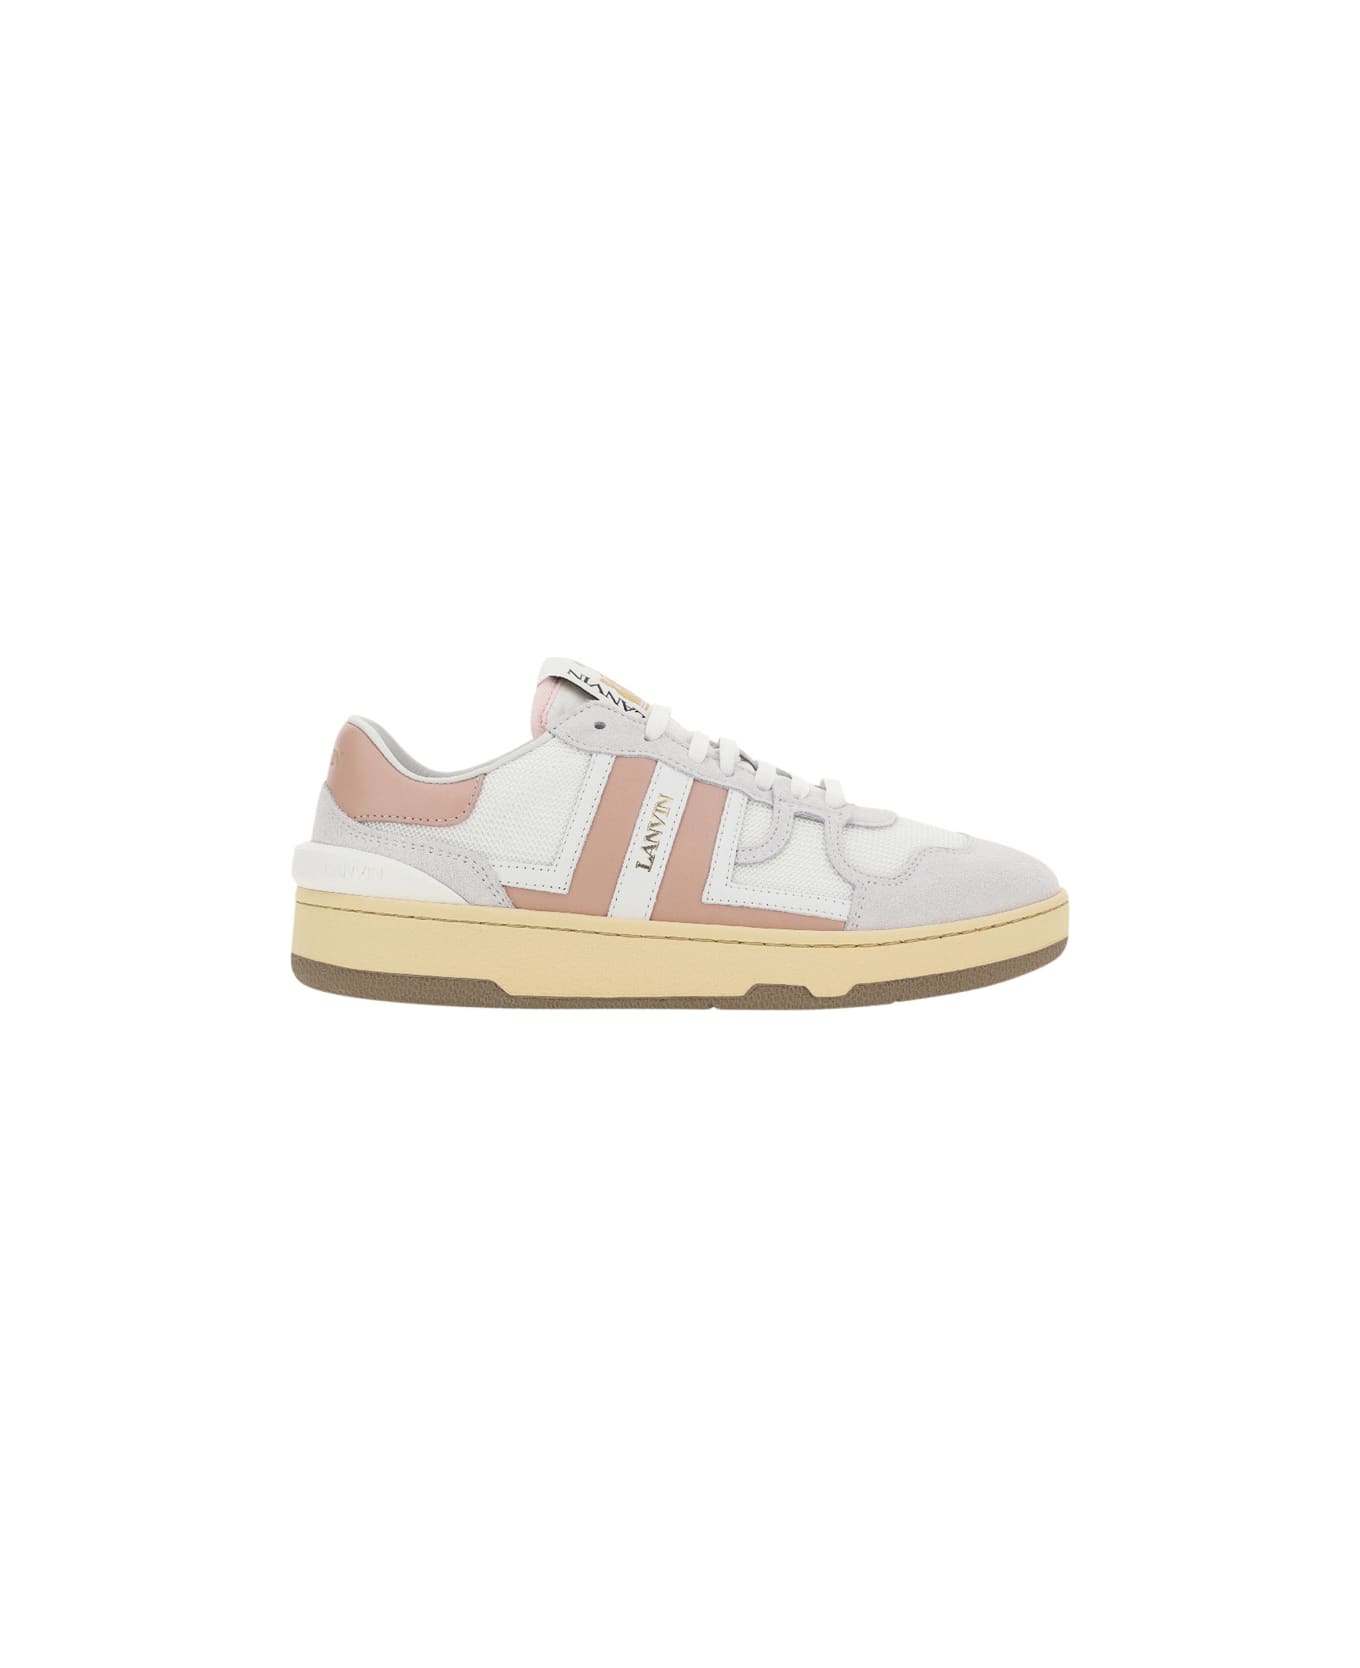 Lanvin Clay Sneakers - White/nude